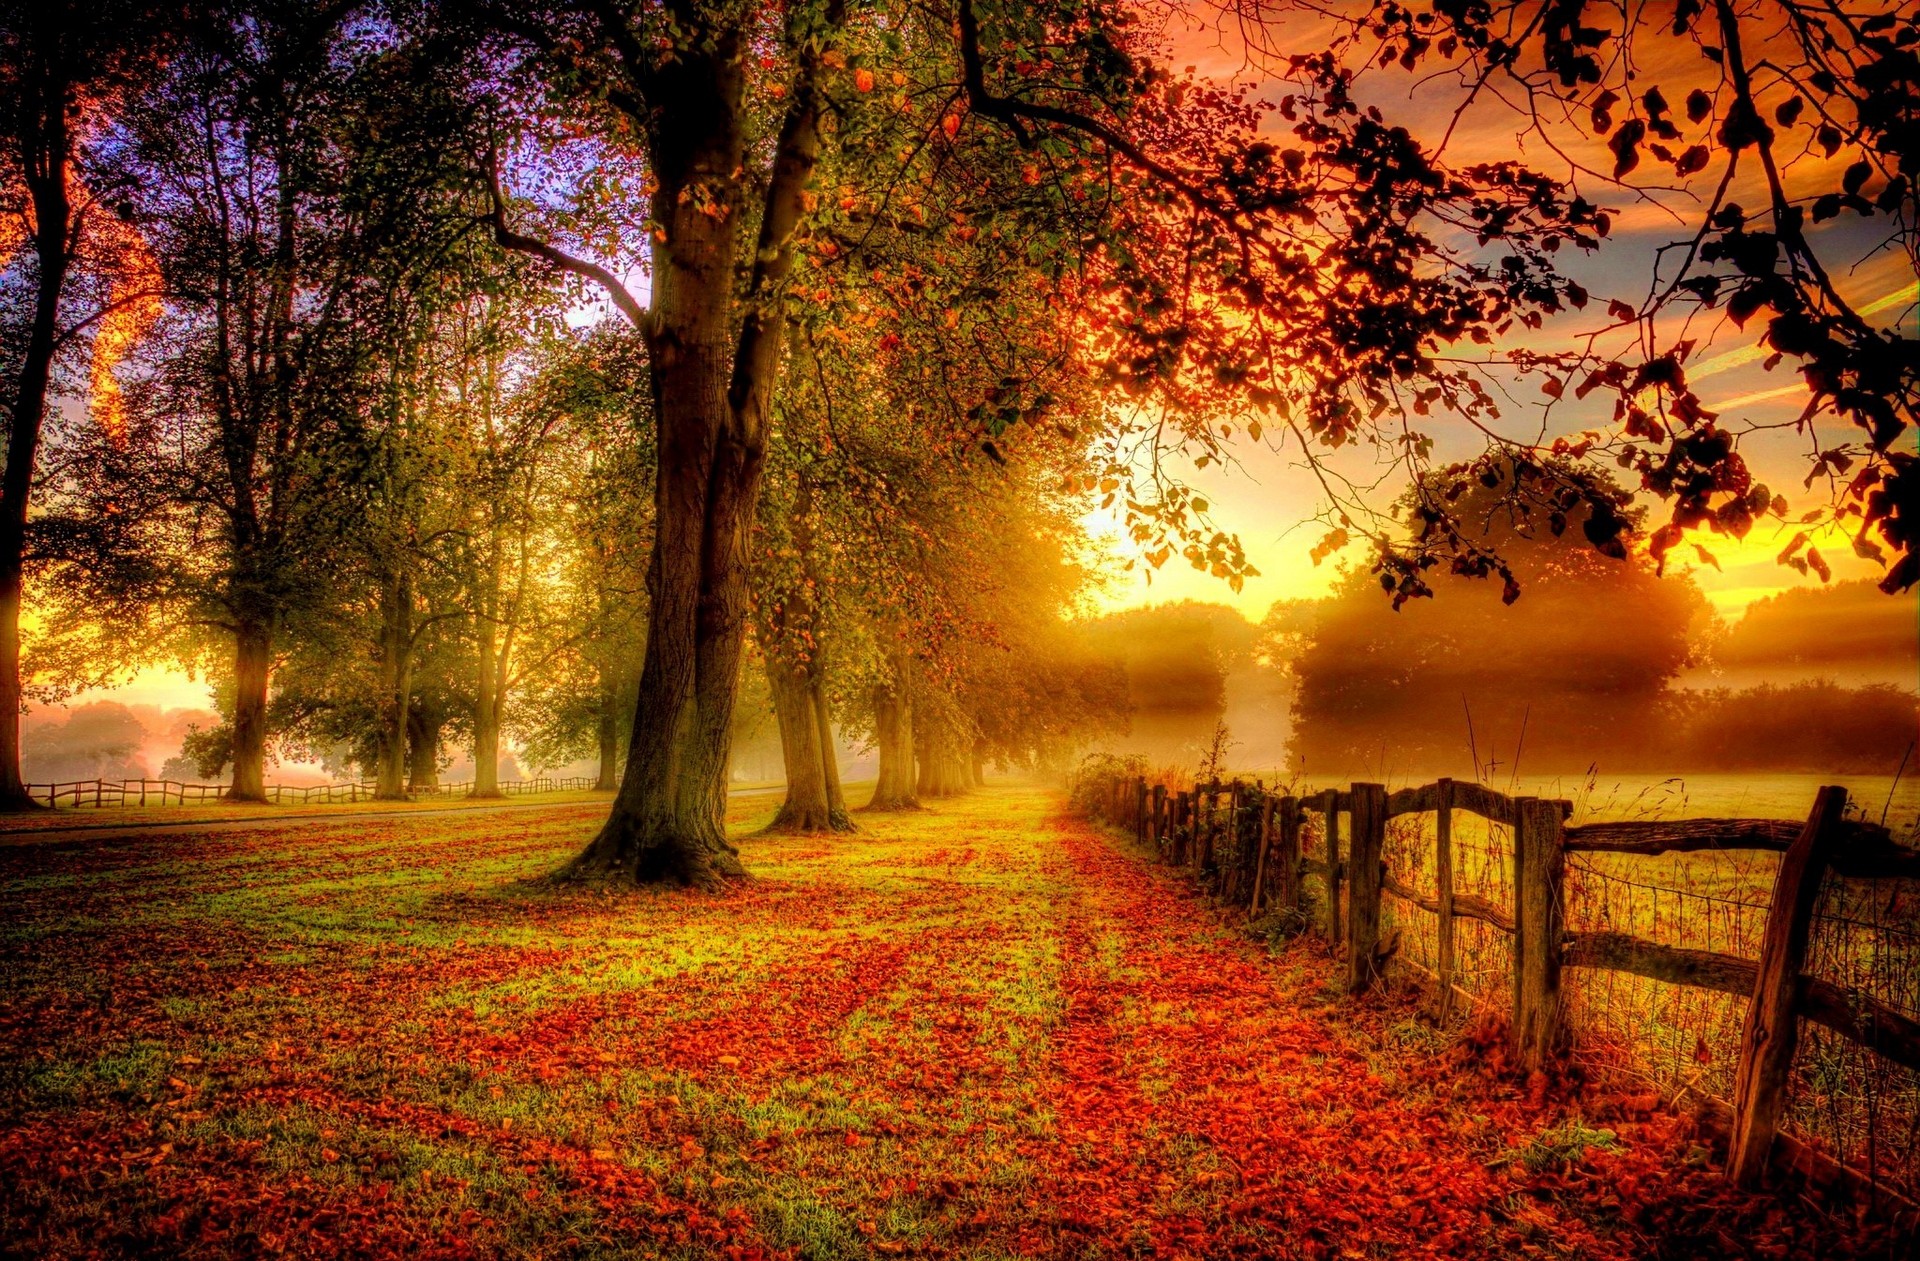 Wallpaper, sunlight, trees, landscape, forest, fall, sunset, nature, red, field, clouds, branch, sunrise, green, yellow, evening, morning, mist, fence, tree, autumn, leaf, flower, dawn, season, woodland, computer wallpaper, woody plant 1920x1261